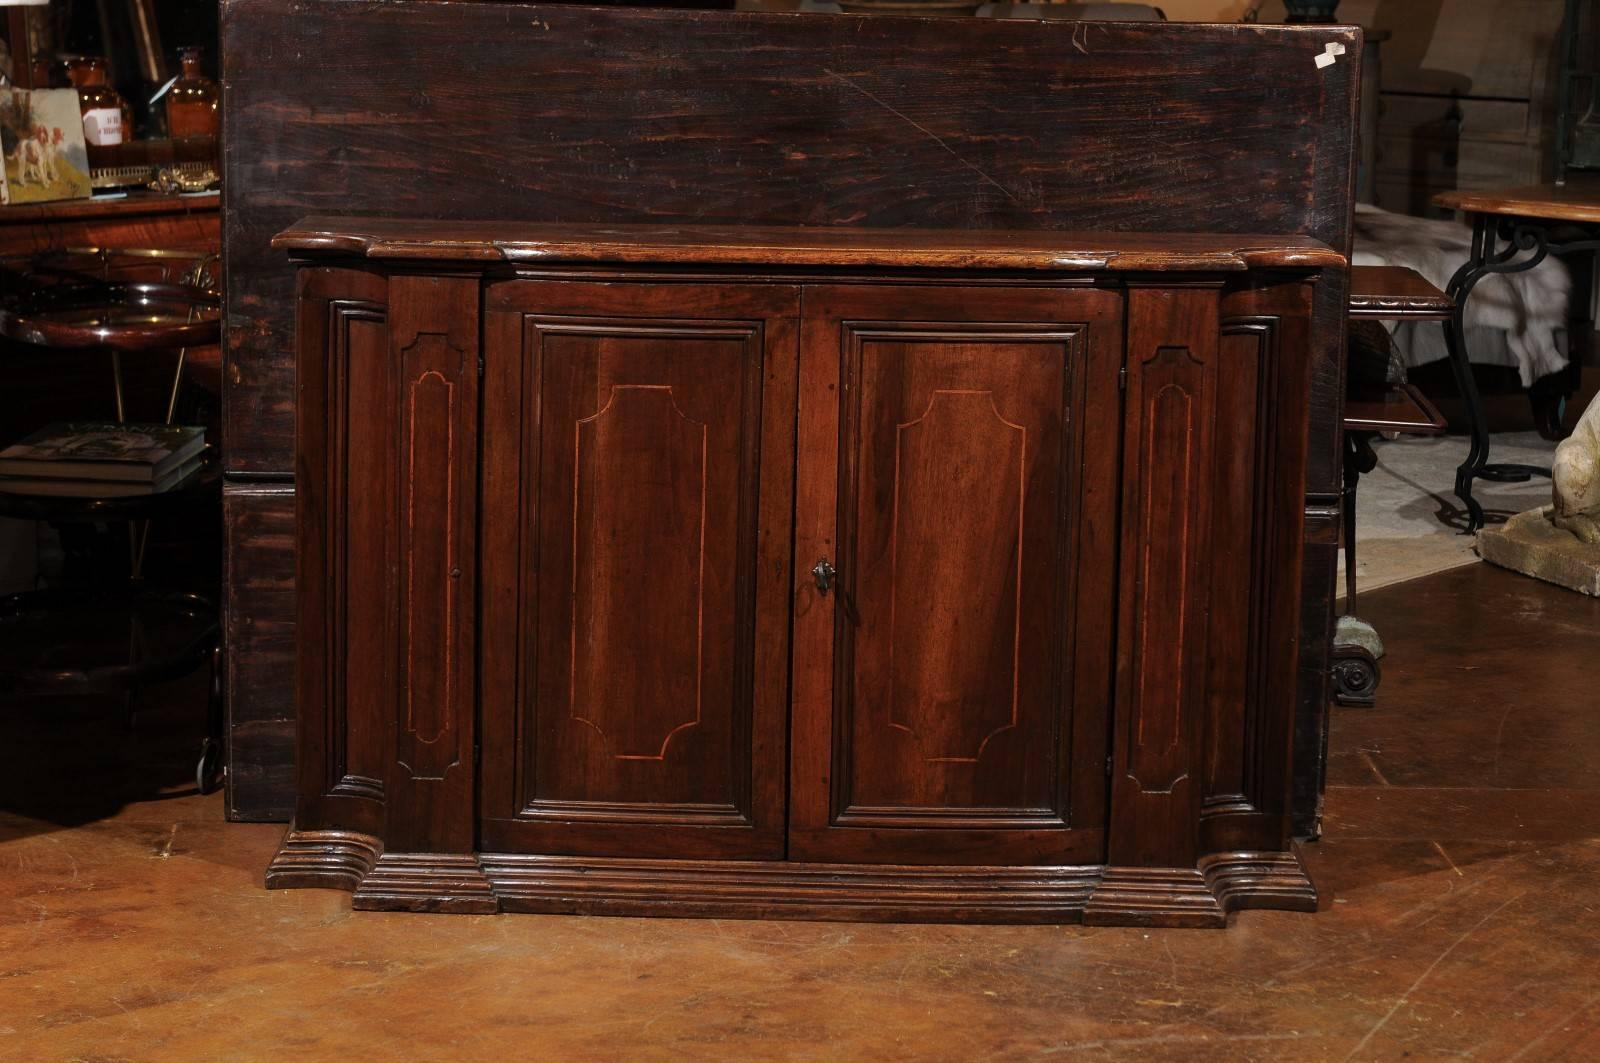 An Italian two-door mahogany buffet with inlaid banding, curved sides and molded plinth from the late 19th century. This Italian buffet features a shaped top with rounded edges sitting above an exquisitely designed facade. Two central doors with